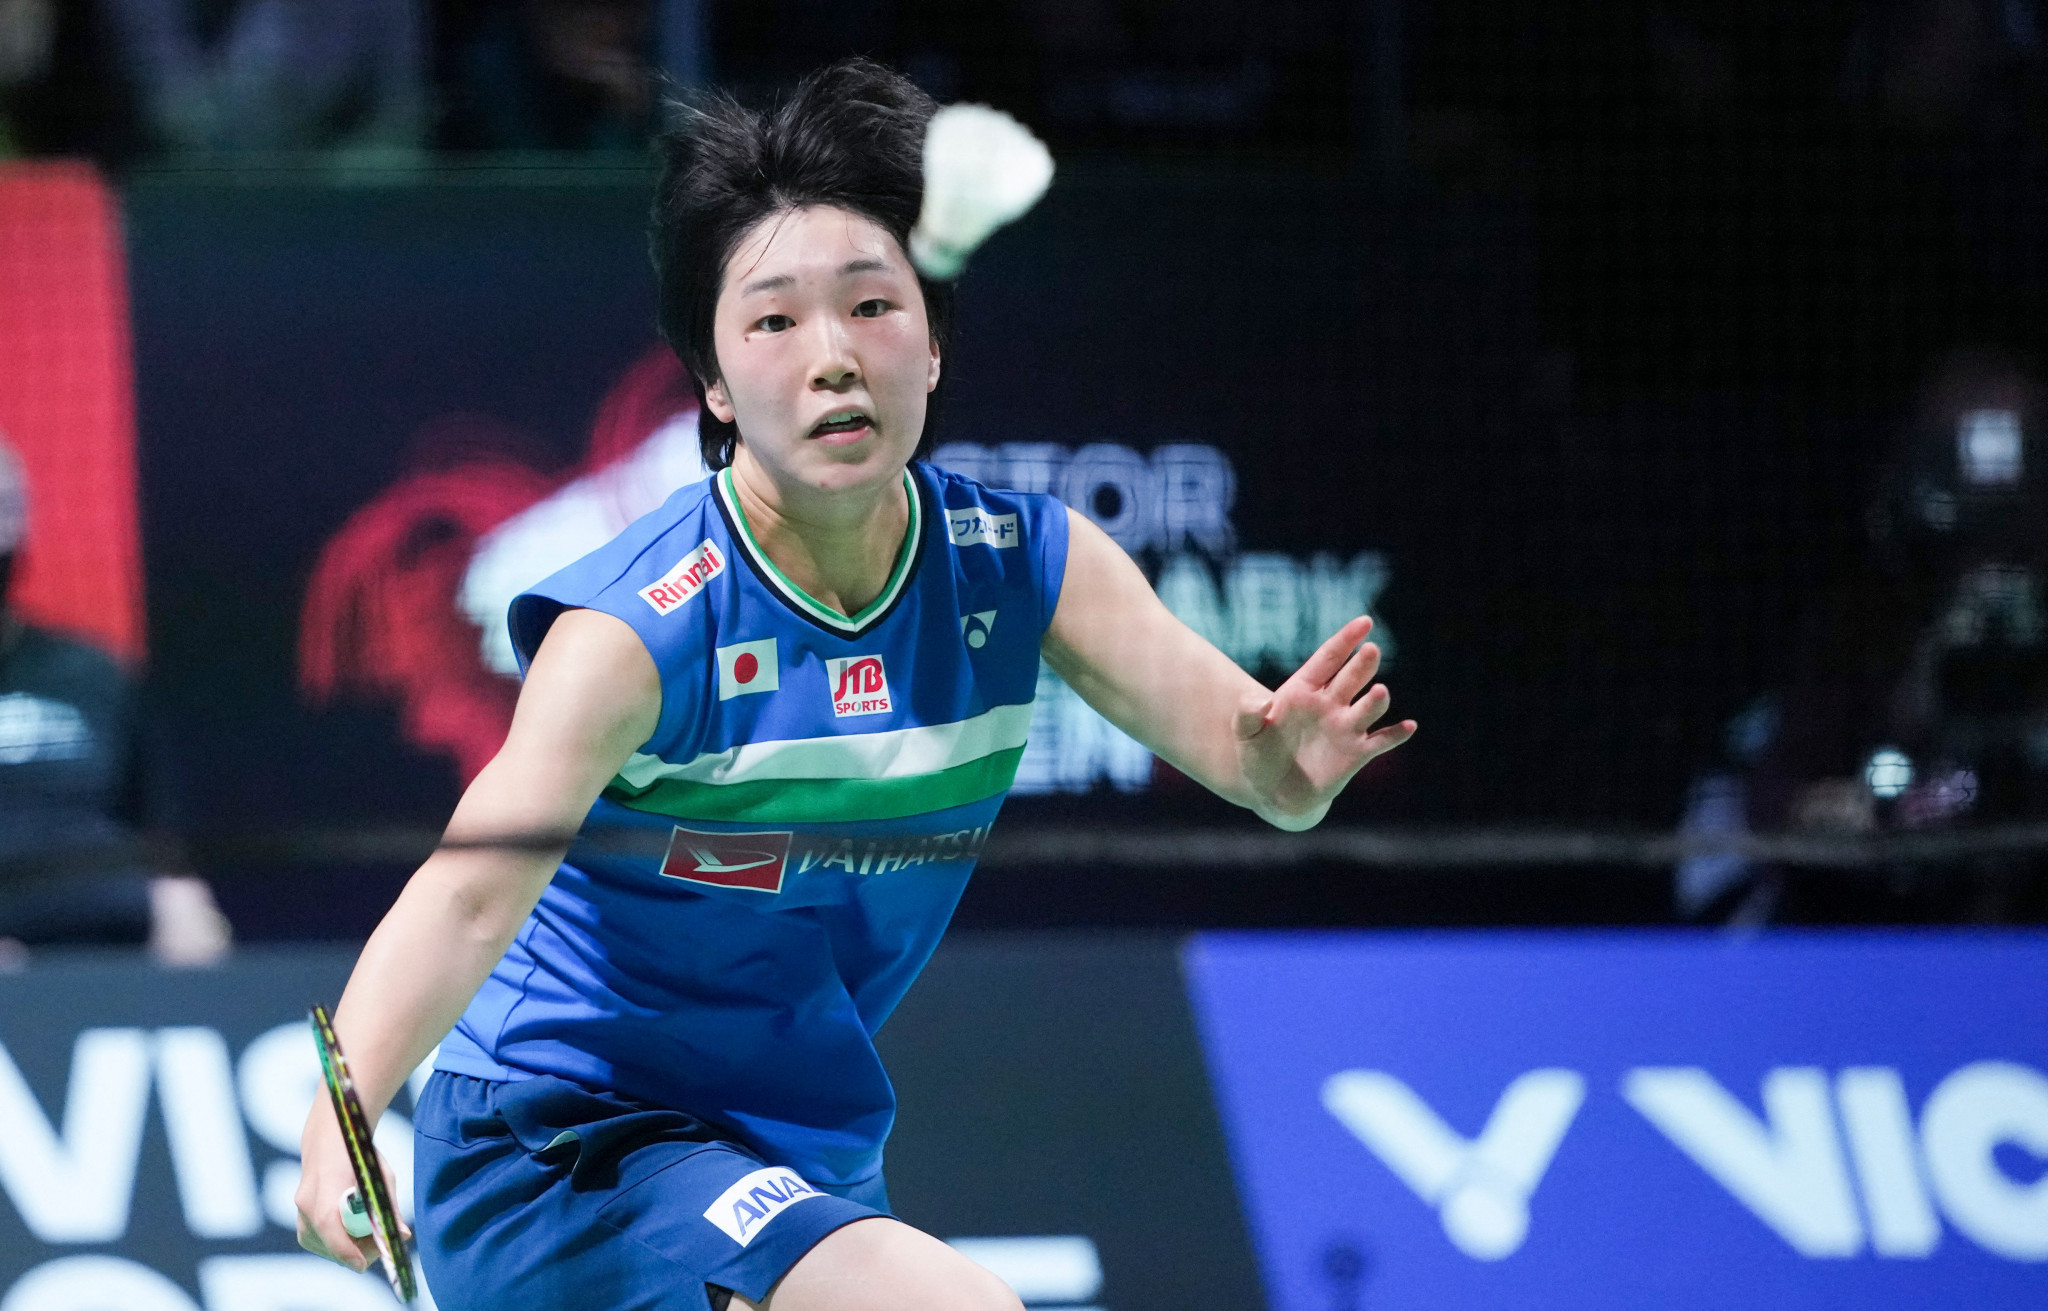 Japan's in-form Akane Yamaguchi triumphed in her opening match of the BWF Indonesian Masters in Bali ©Getty Images